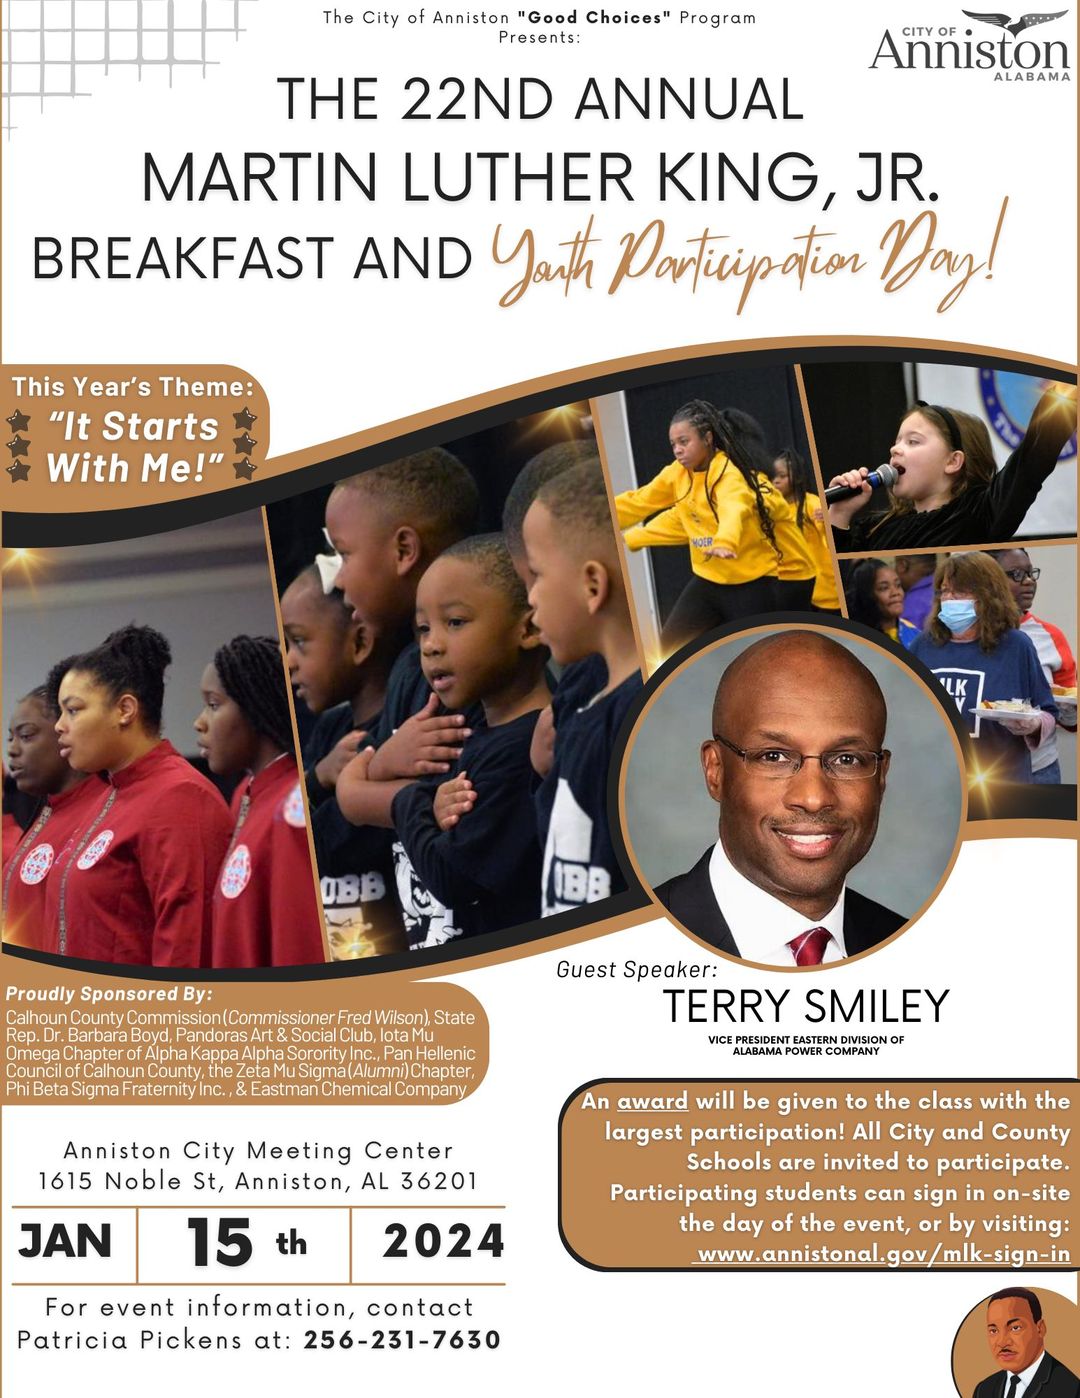 Annual MLK, Jr. Breakfast & Youth Participation Day